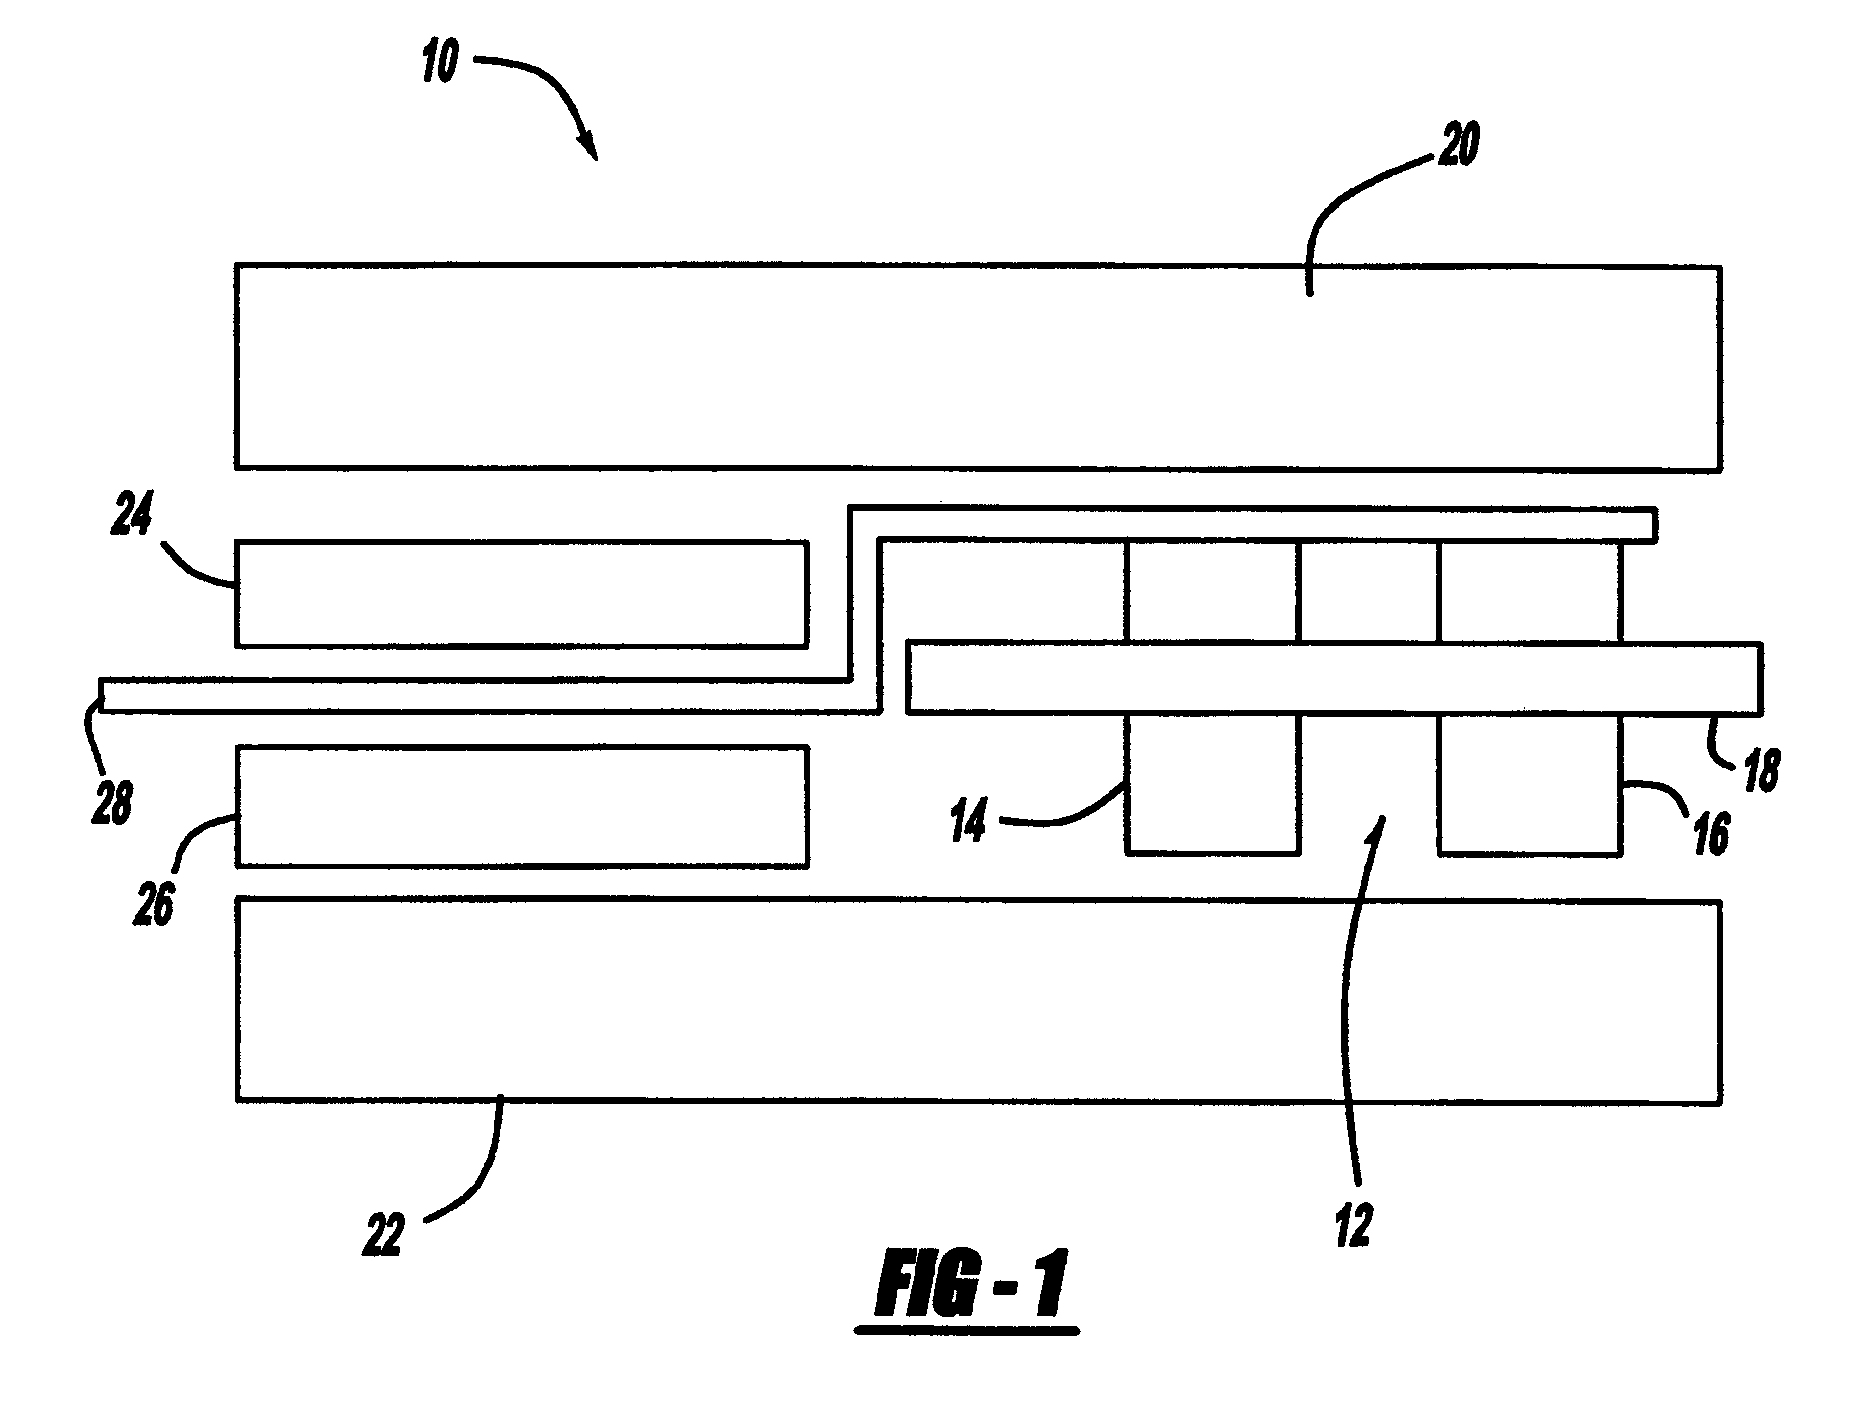 Multi-component fuel cell gasket for low temperature sealing and minimal membrane contamination